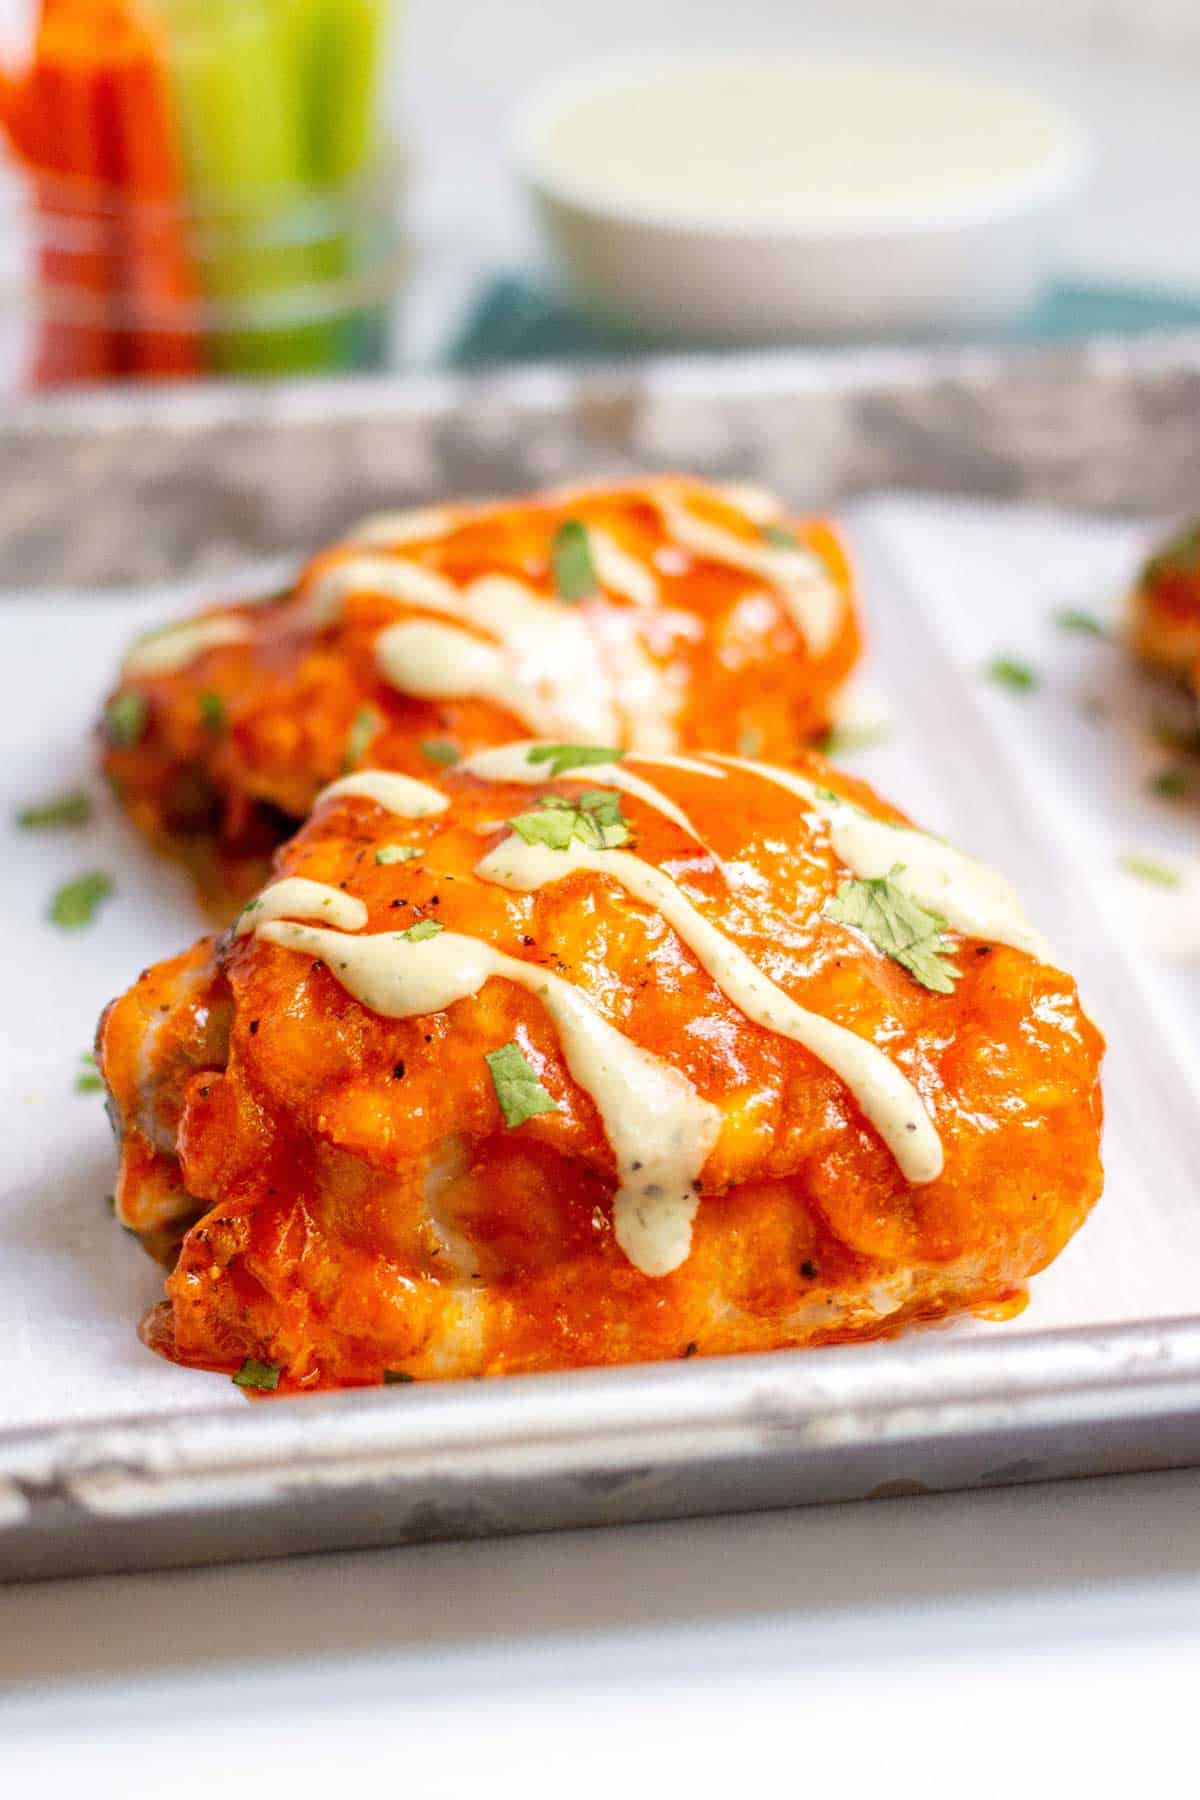 Buffalo chicken thigh with a drizzle of ranch